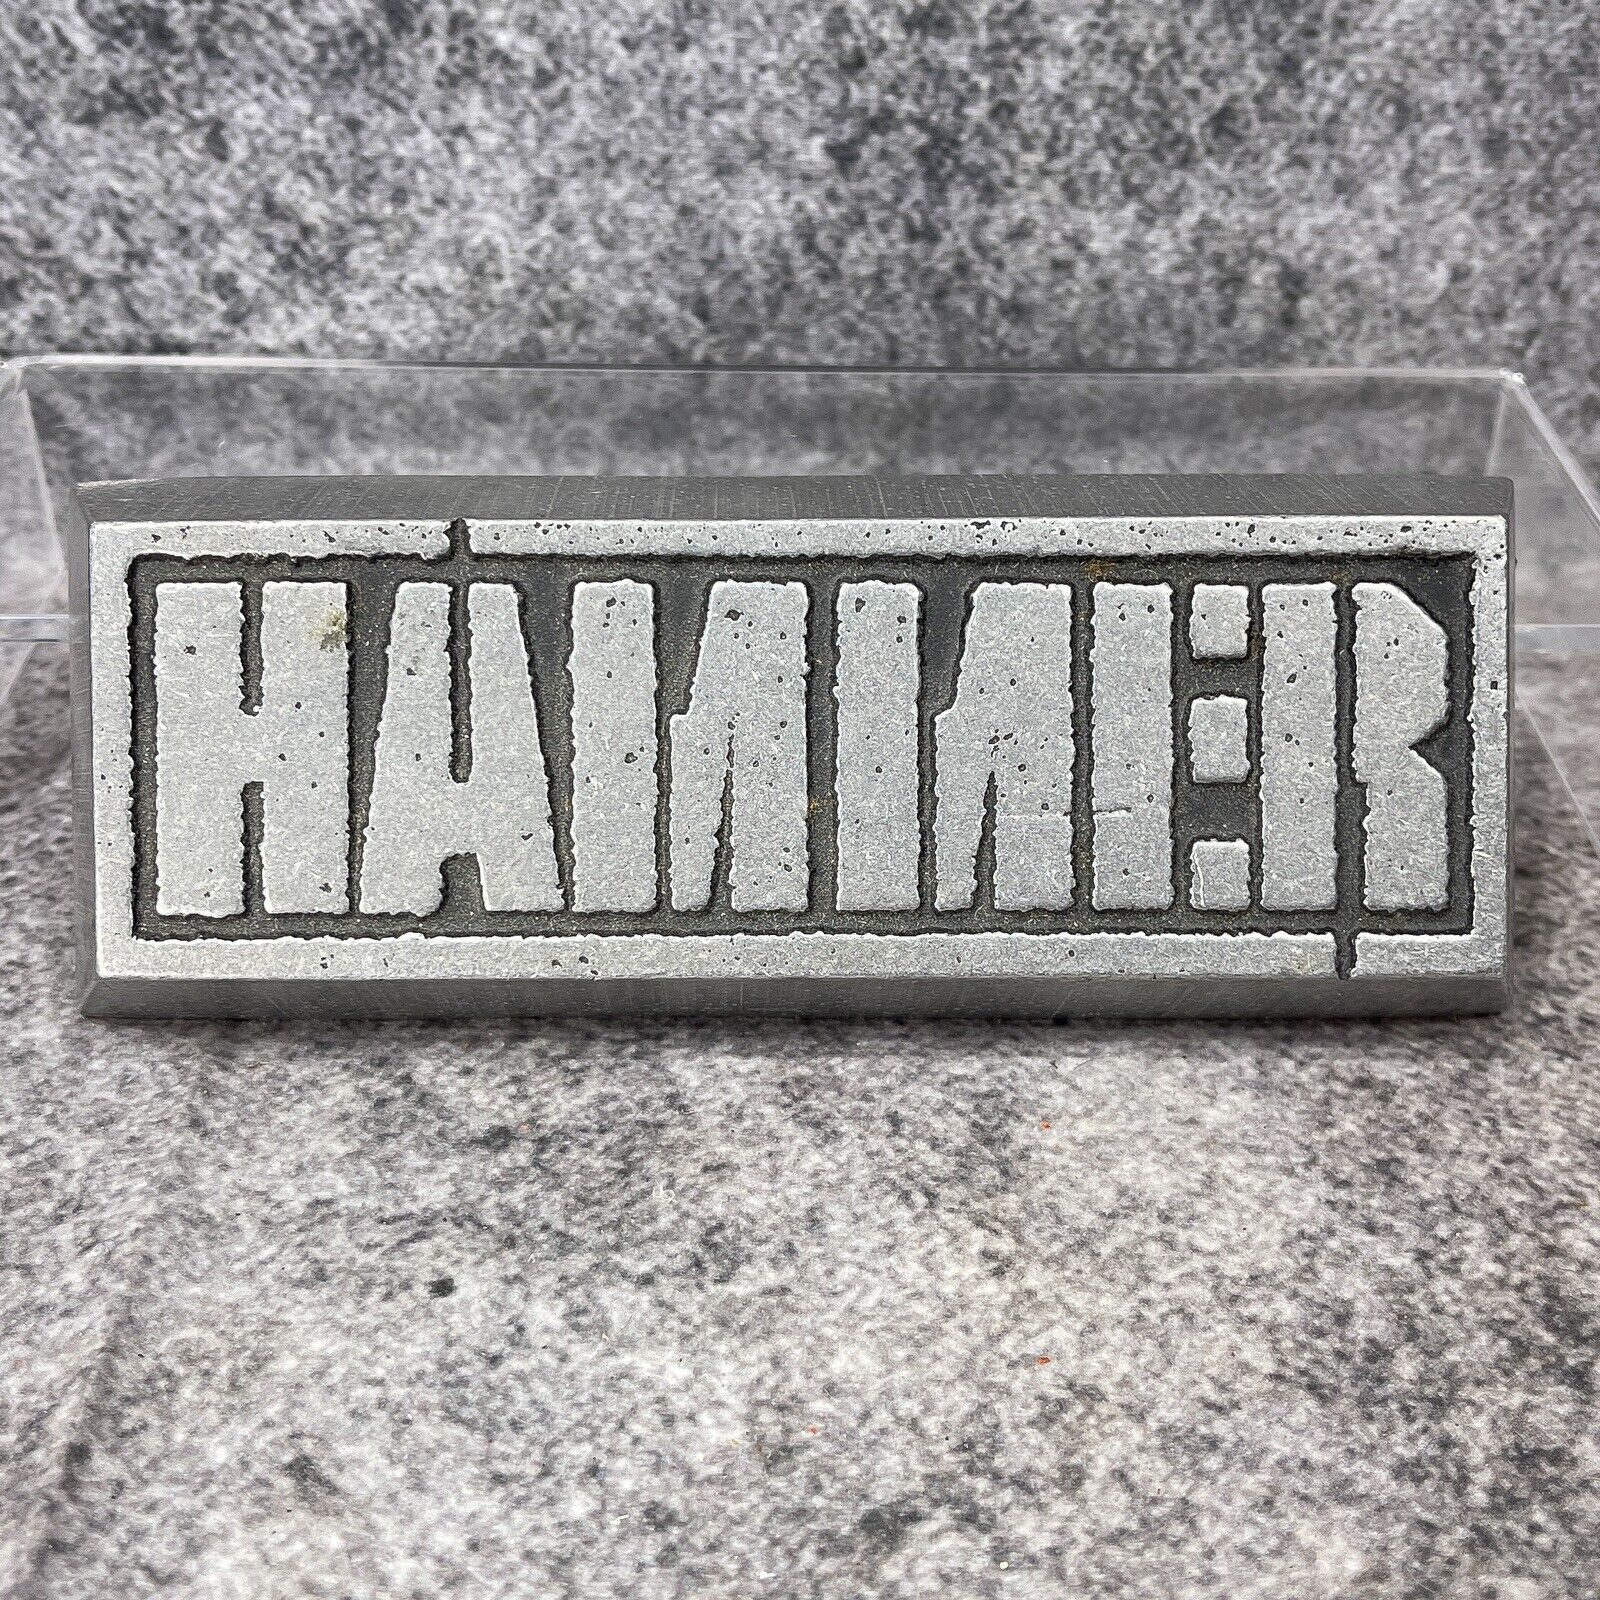 Rare Vintage Promotional Metal Paperweight MC HAMMER The Funky Headhunter 1994